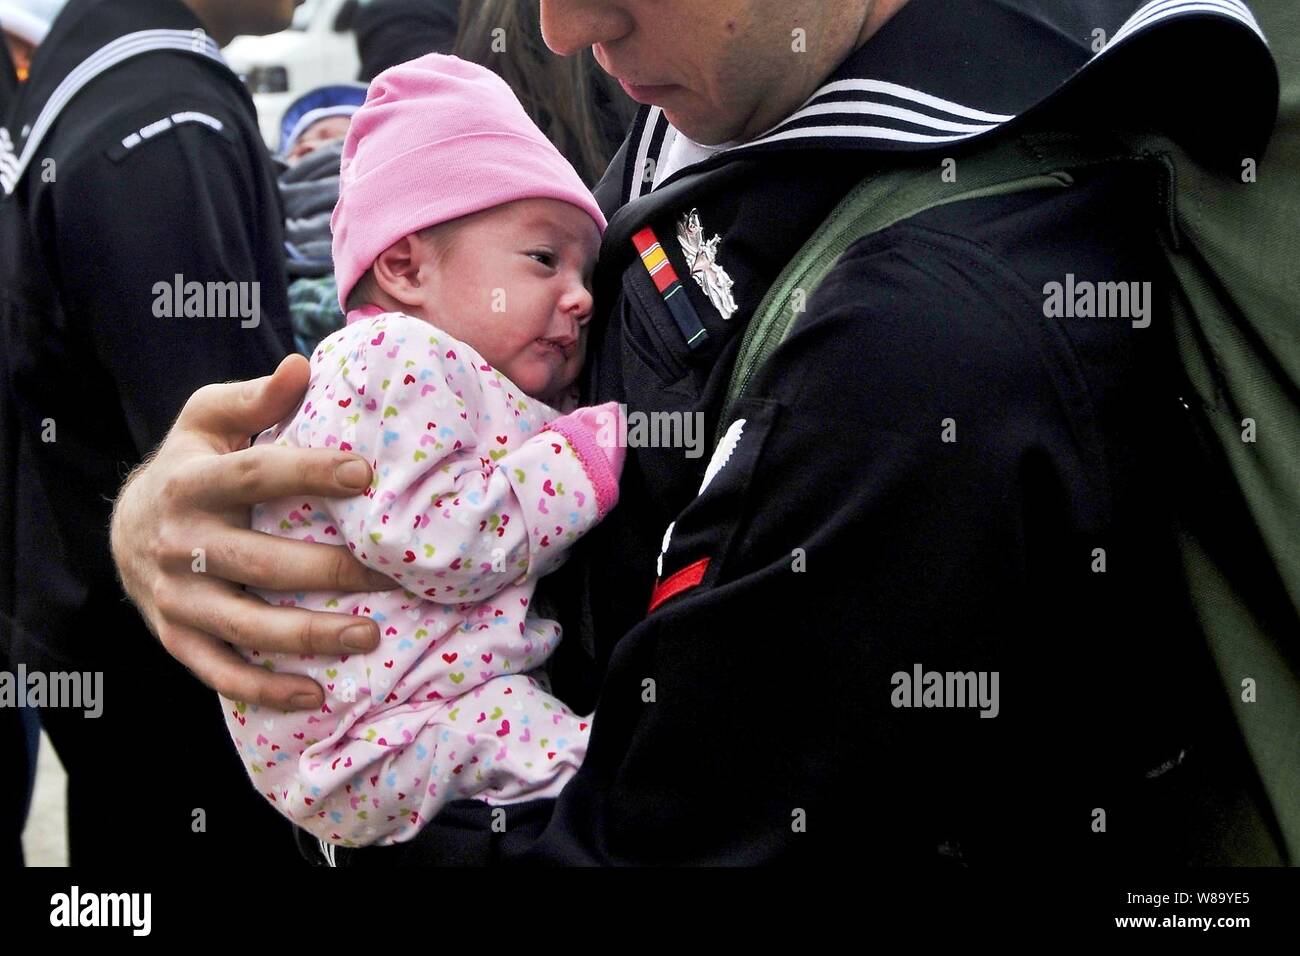 U.S. Navy Petty Officer 3rd Class Matthew Sandlin holds his newborn daughter for the first time after being underway for six months aboard the aircraft carrier USS George Washington (CVN 73) in the Pacific Ocean at Yokosuka, Japan, on Nov. 1, 2010.  Sandlin is assigned as a machinist's mate. Stock Photo